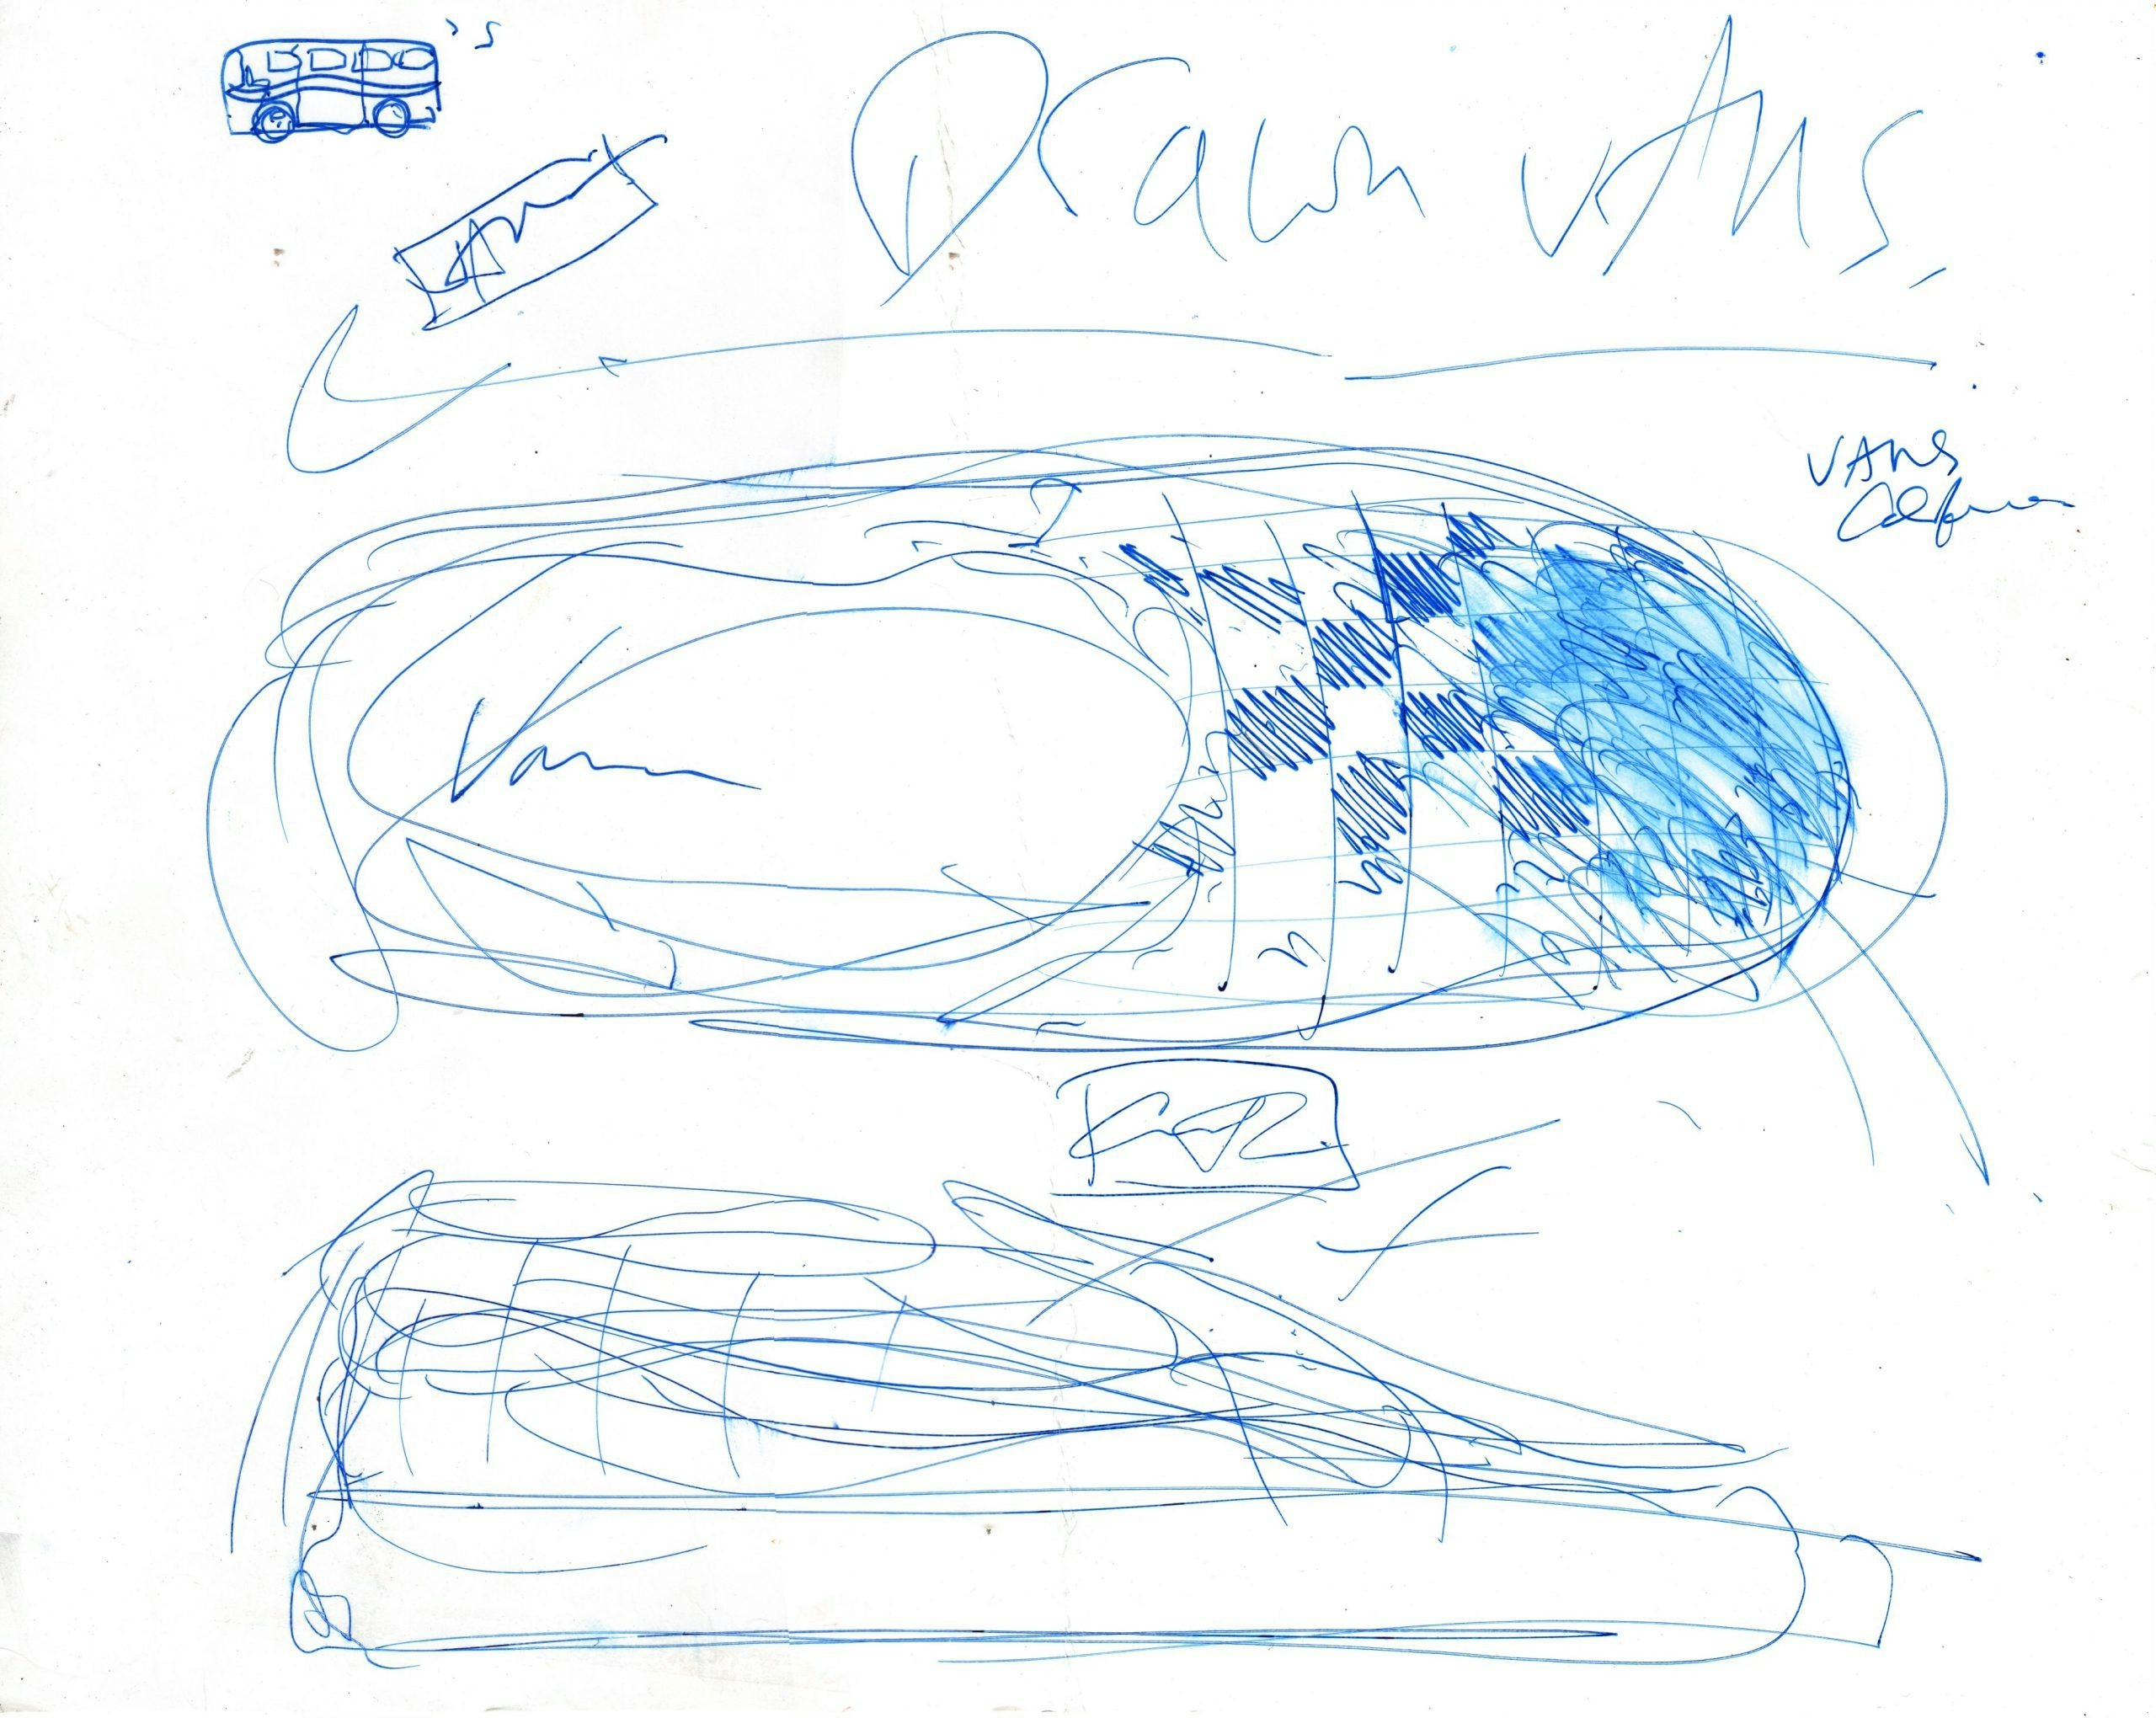 Connor Tingley's drawings of the Vault By Vans designs. Photo: Connor Tingley